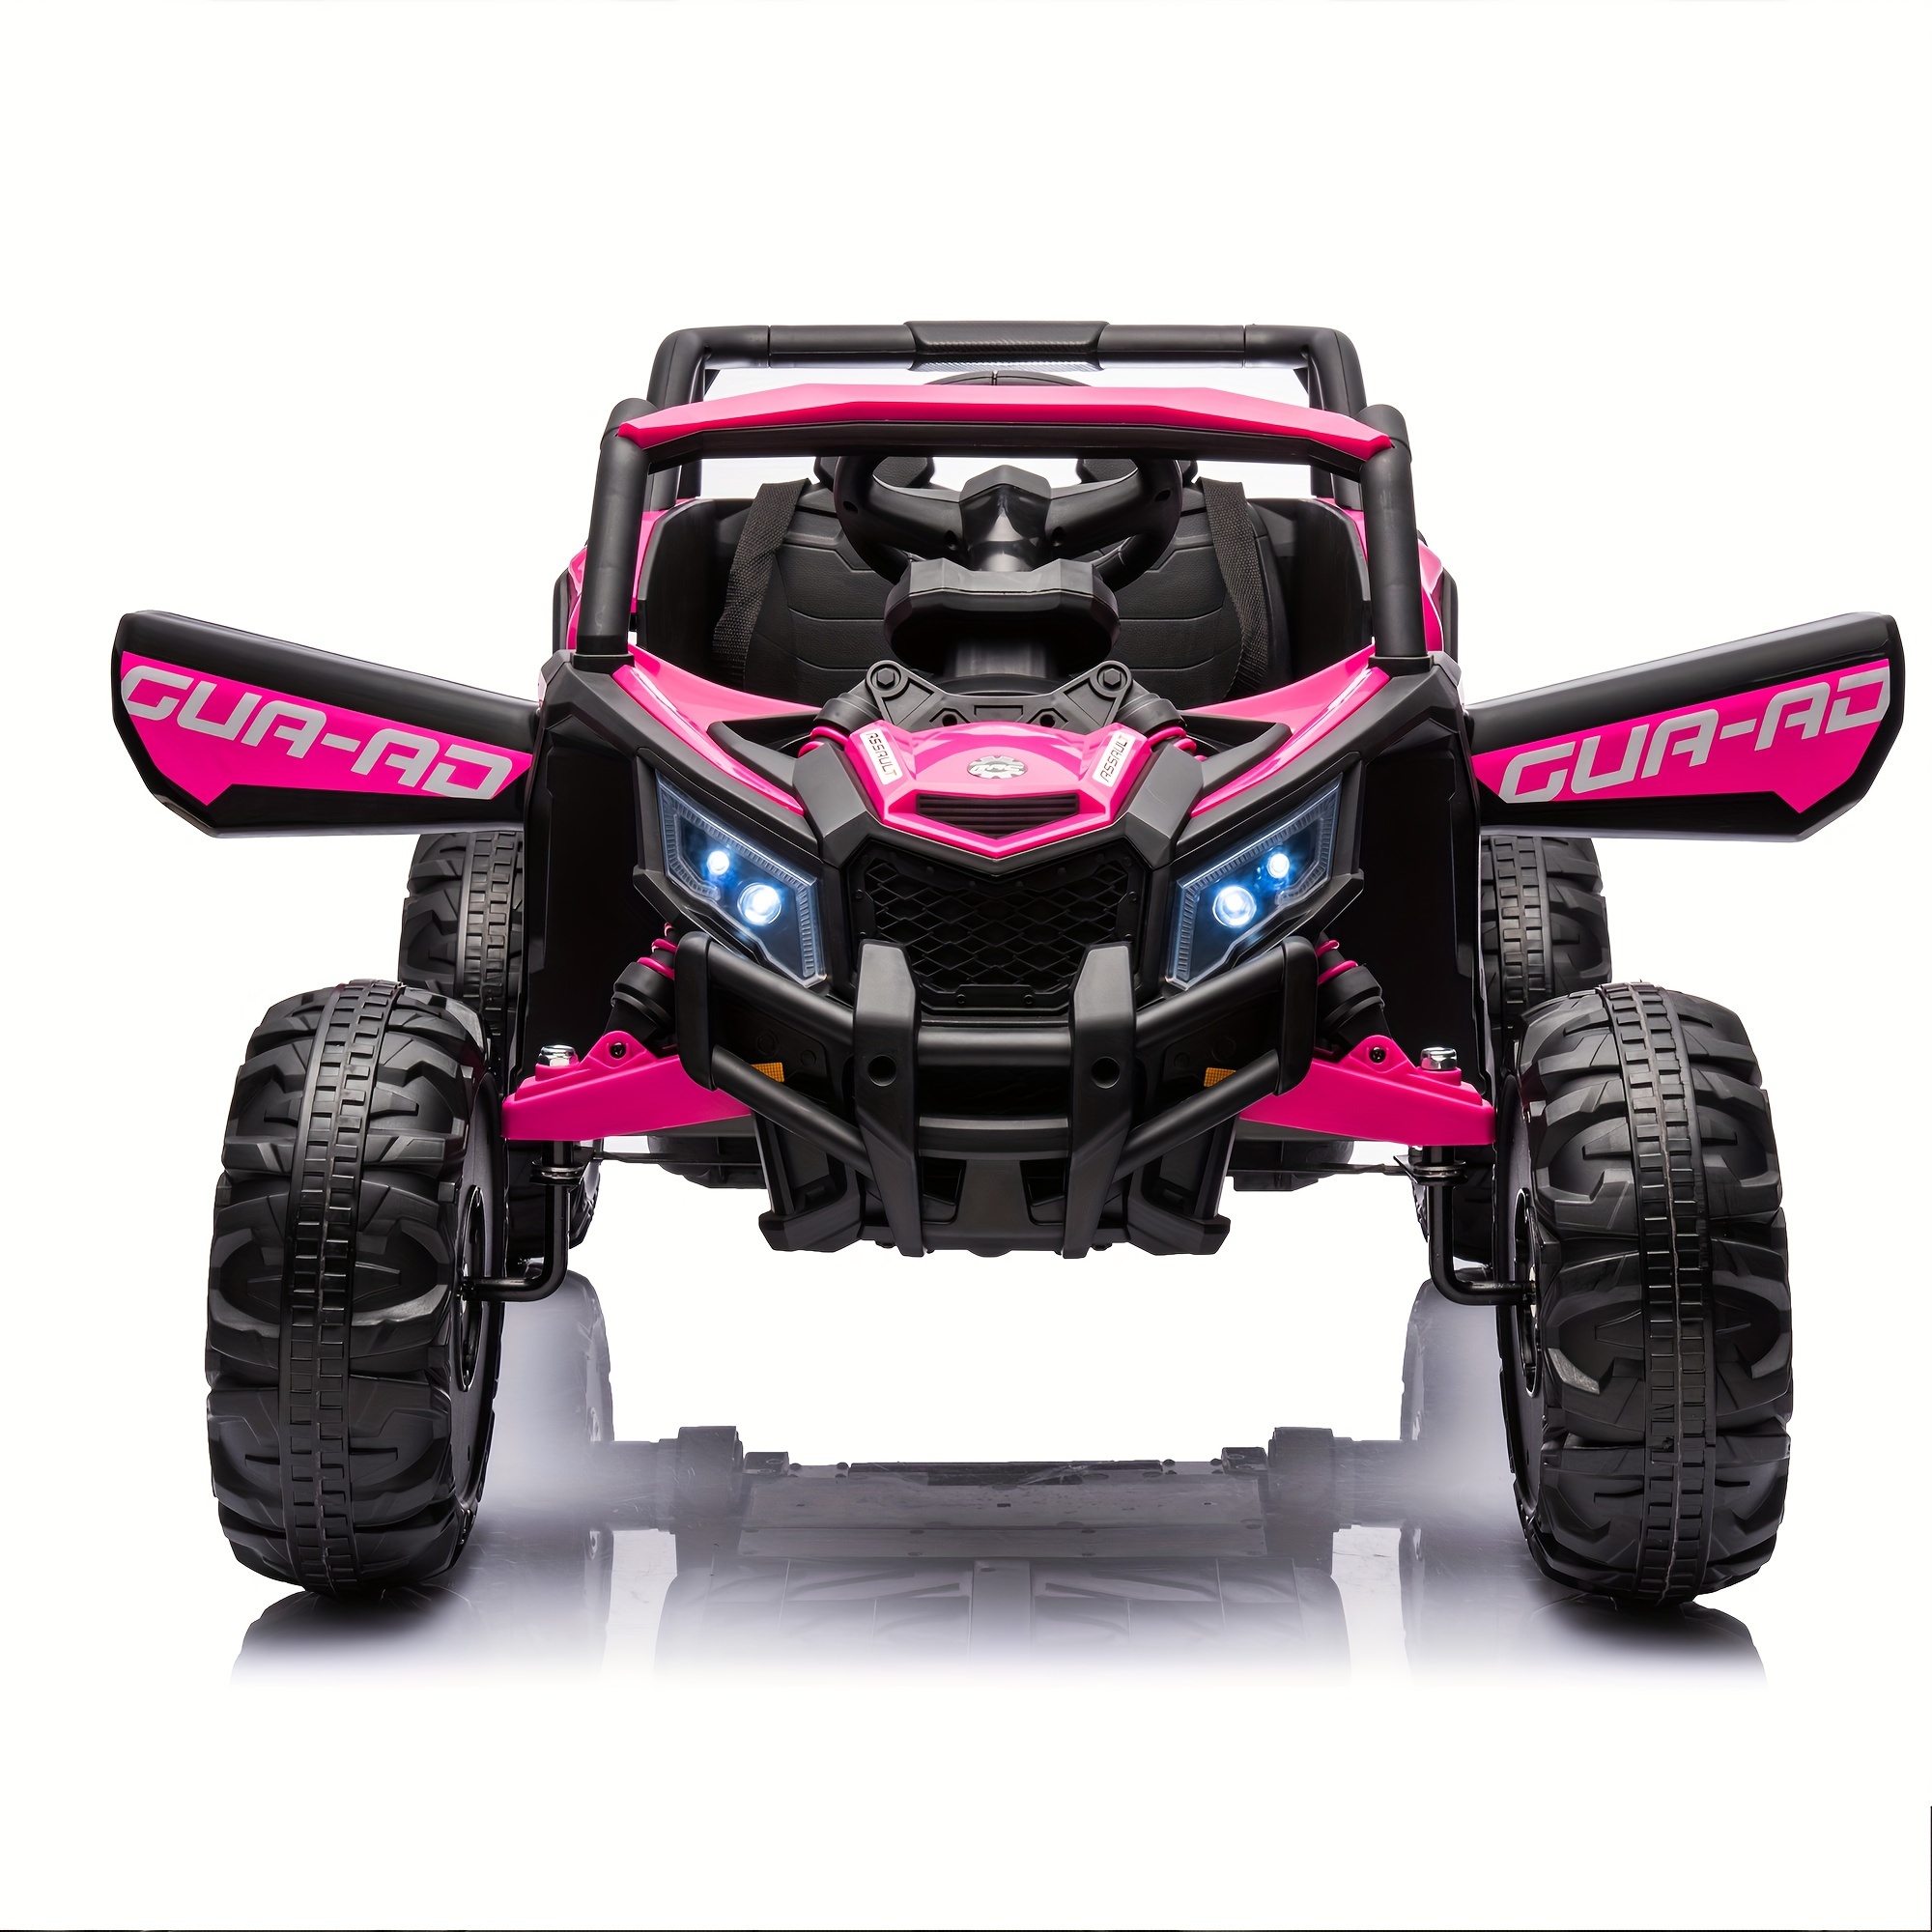 

1pc Battery Operated Car, 12v Electric Car With Remote Control, Music Player, 3 Speeds, Suspension, Power Car Wheels, Ride On Truck Gift, Pink